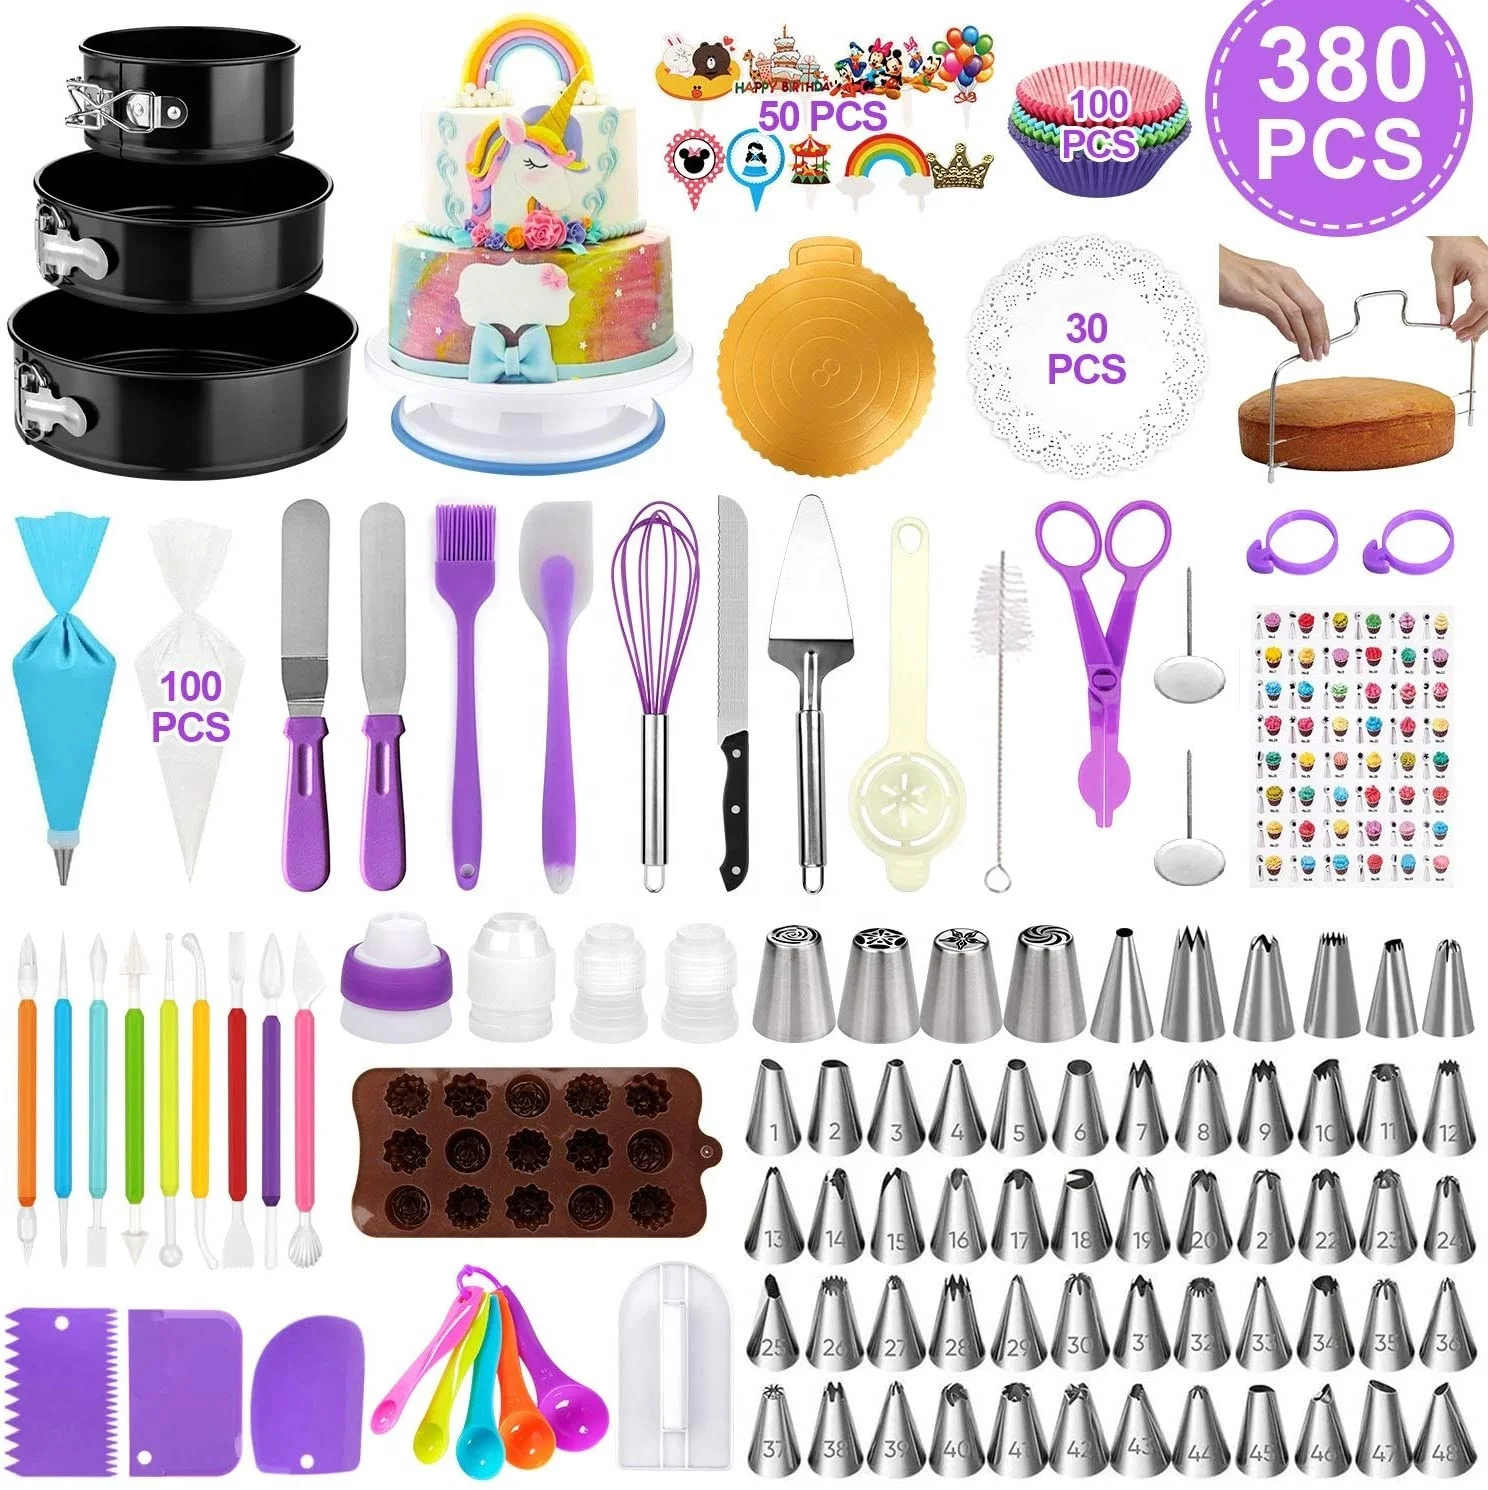 

380 PCs Cake Decorating Supplies Kit for Beginners Turntable stand Numbered icing tips Spatula Russian nozzles Baking tools, As picture